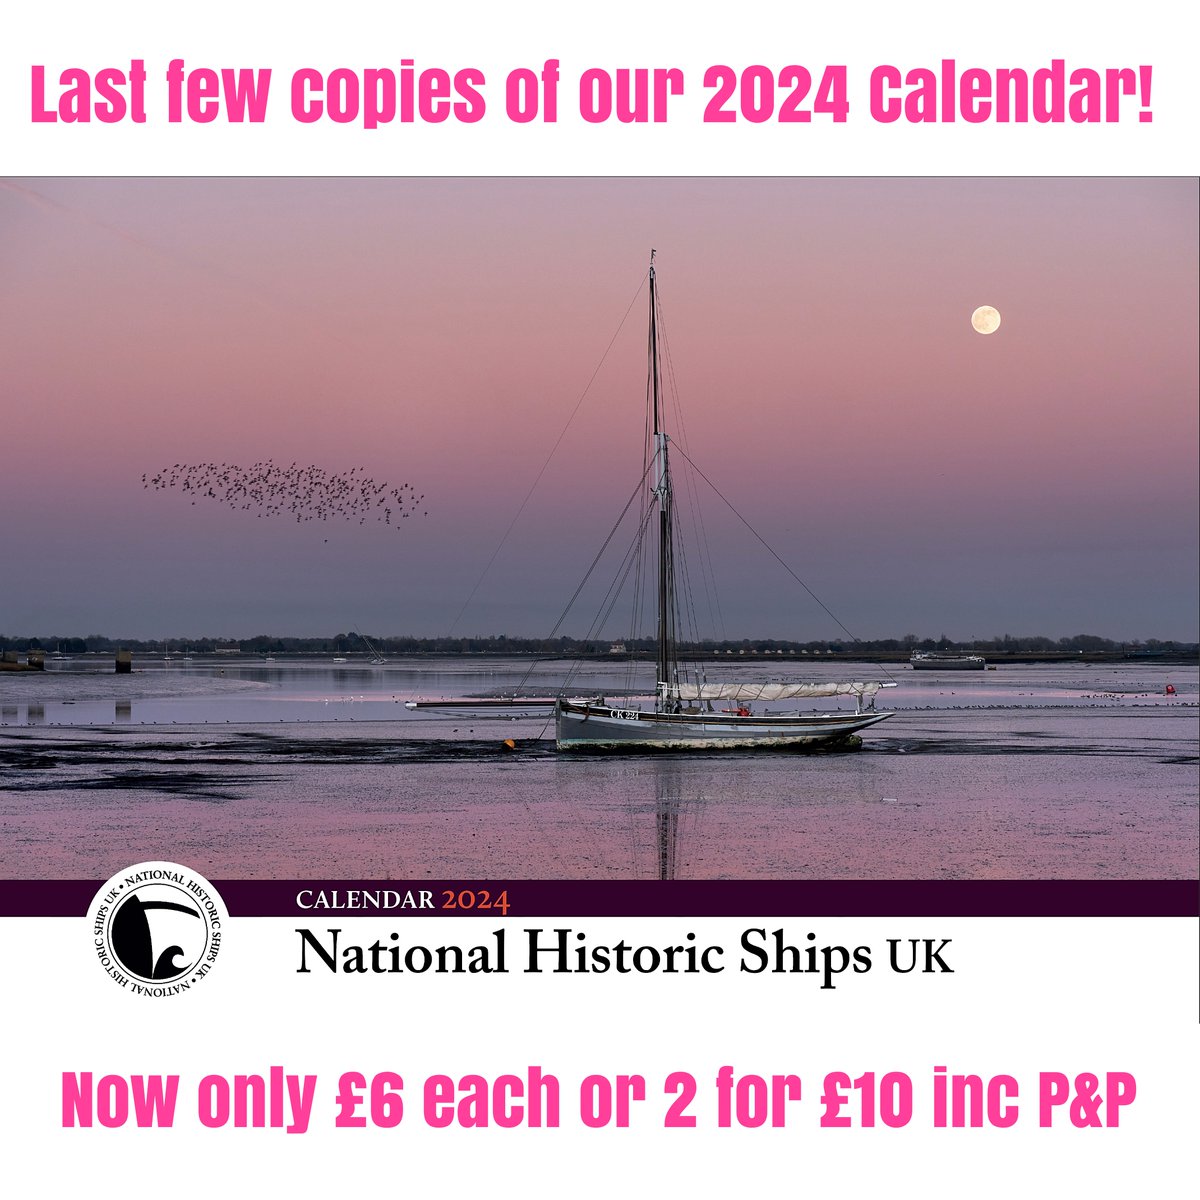 Last few copies of our 2024 calendar, now reduced to £6 each or 2 for £10 including postage. Get one before they sell out! nationalhistoricships.org.uk/sales